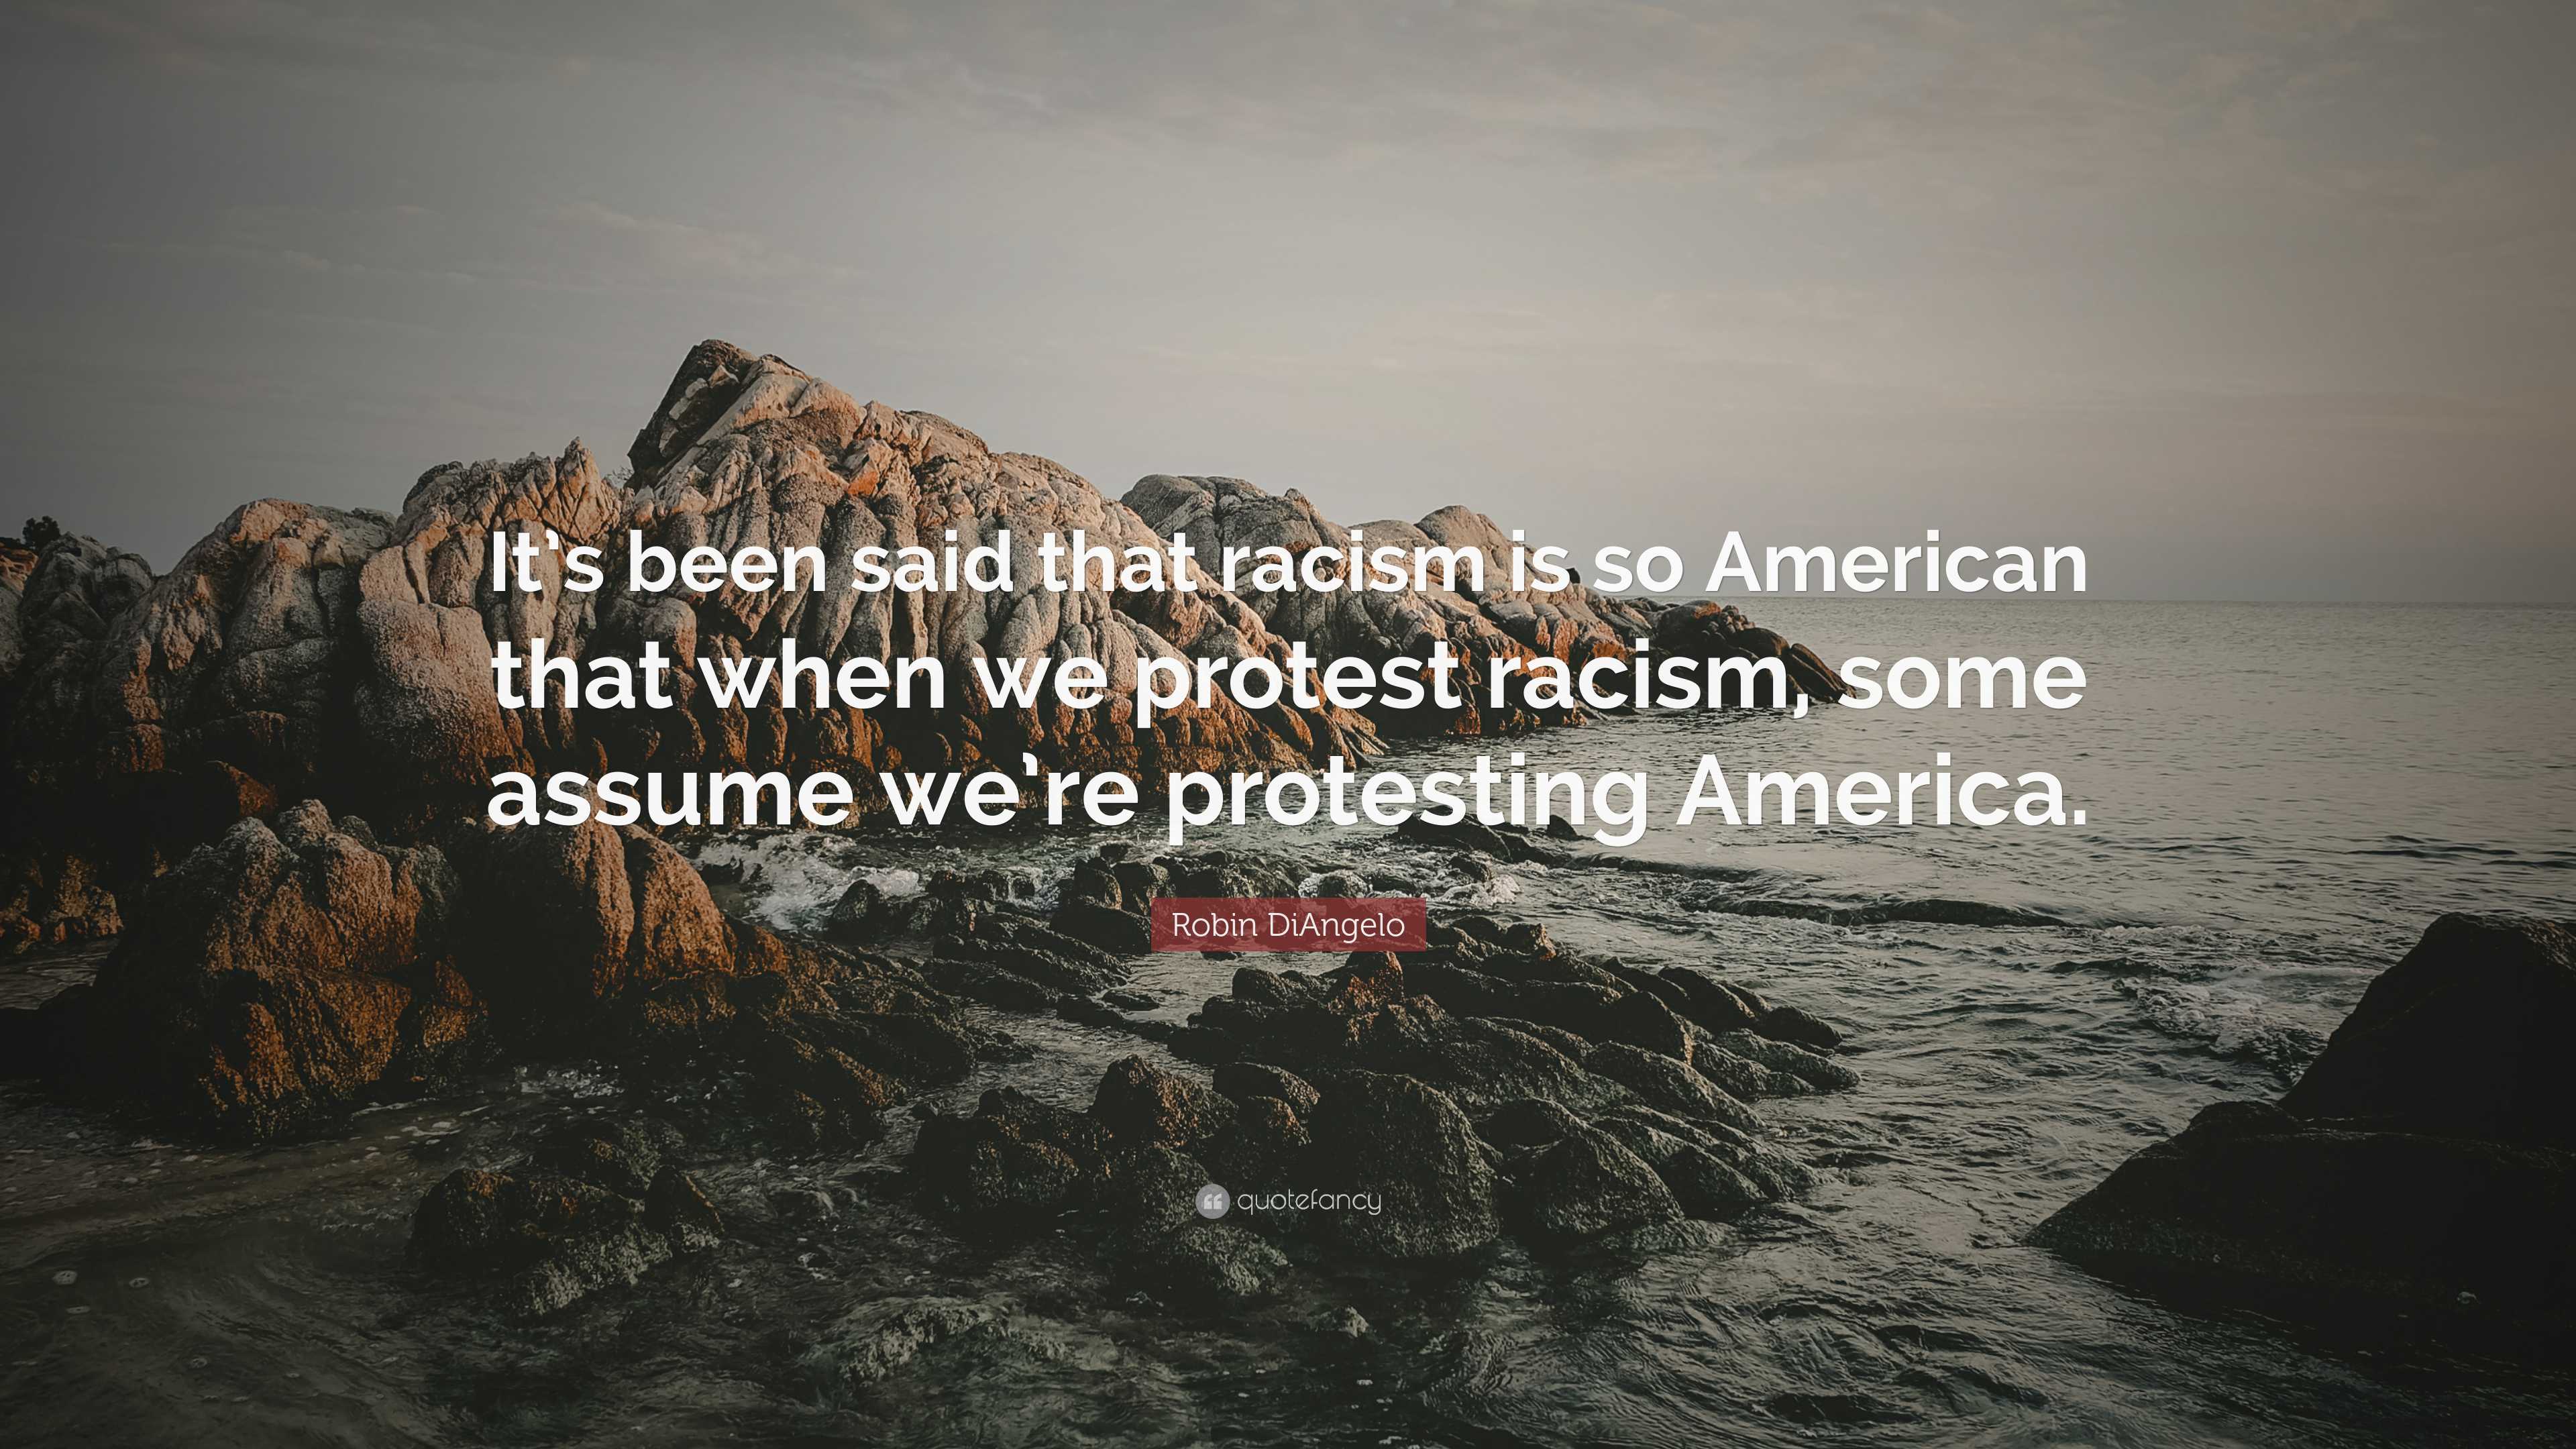 Robin DiAngelo Quote: “It's been said that racism is so American that when  we protest racism